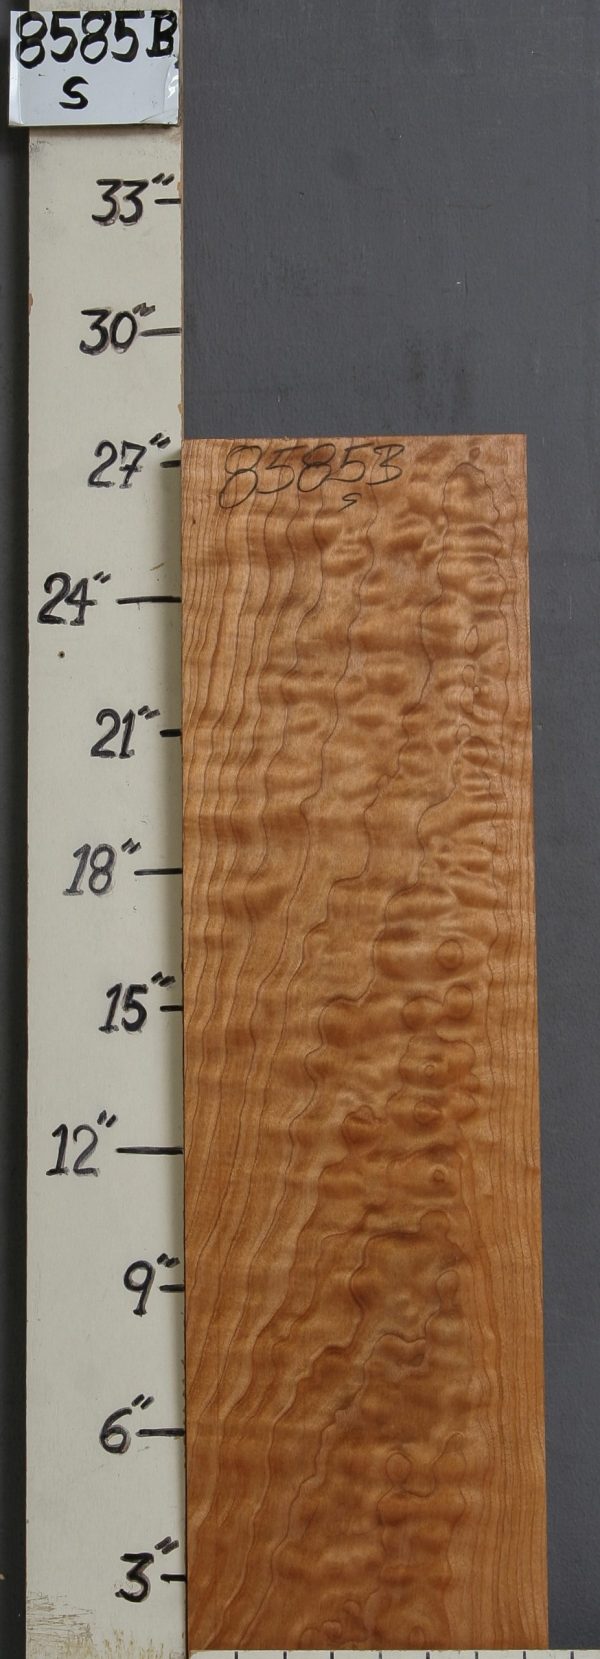 QUILTED MAPLE BLOCK 7"1/2 X 27" X 1"1/4 (NWT-8585B)